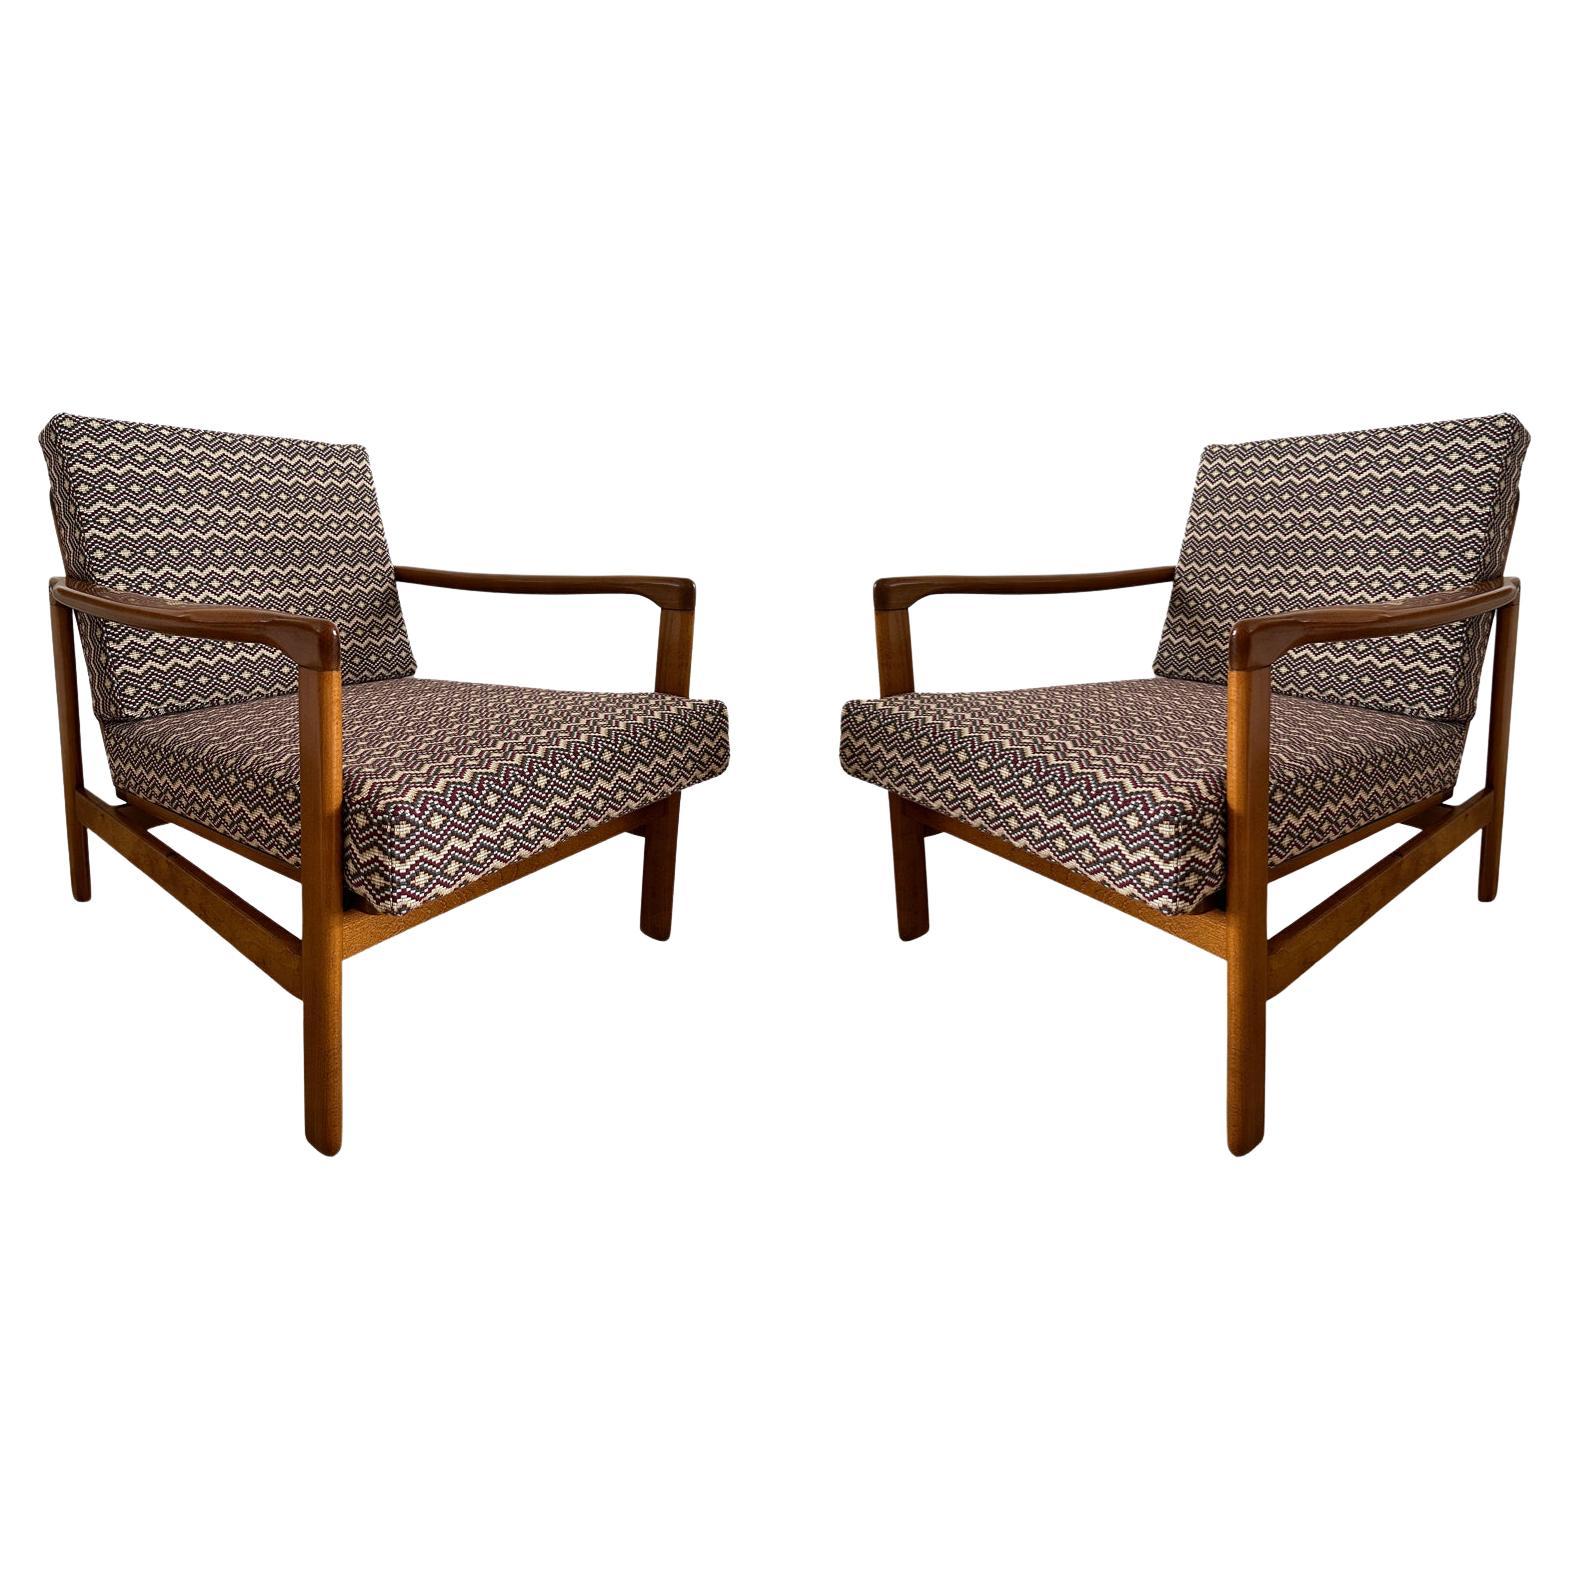 Set of Two Armchairs, Light Wood, Gaston Y Daniela Upholstery, Europe, 1960s For Sale